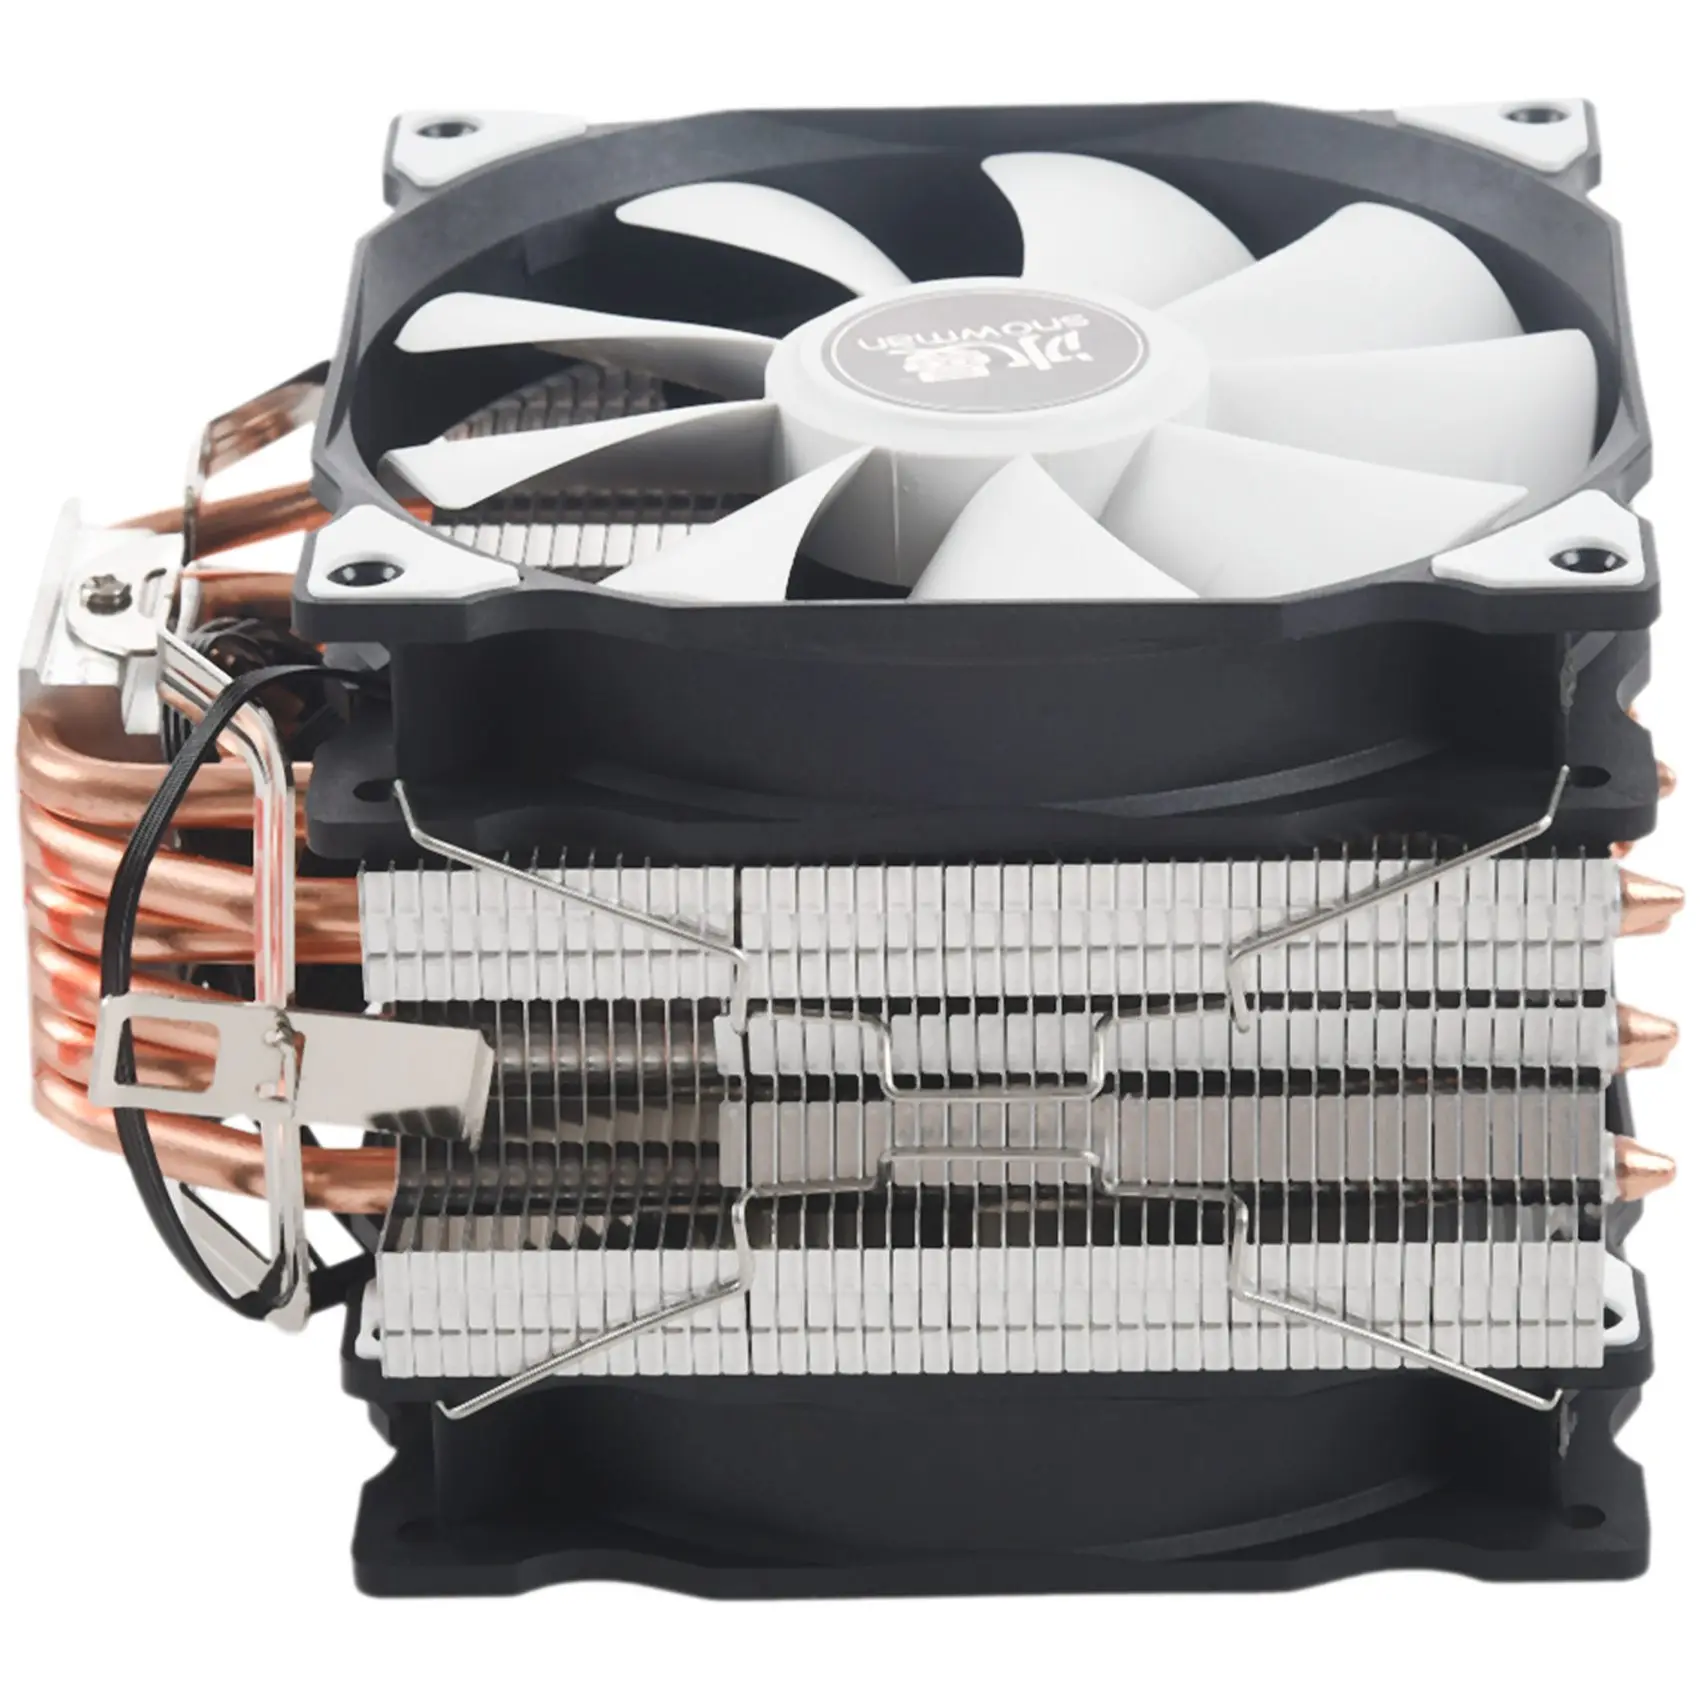 

SNOWMAN M-T6 4PIN CPU Cooler Master 6 Heatpipe Double Fans 12cm Cooling Fan LGA775 1151 115X 1366 Support Intel AMD